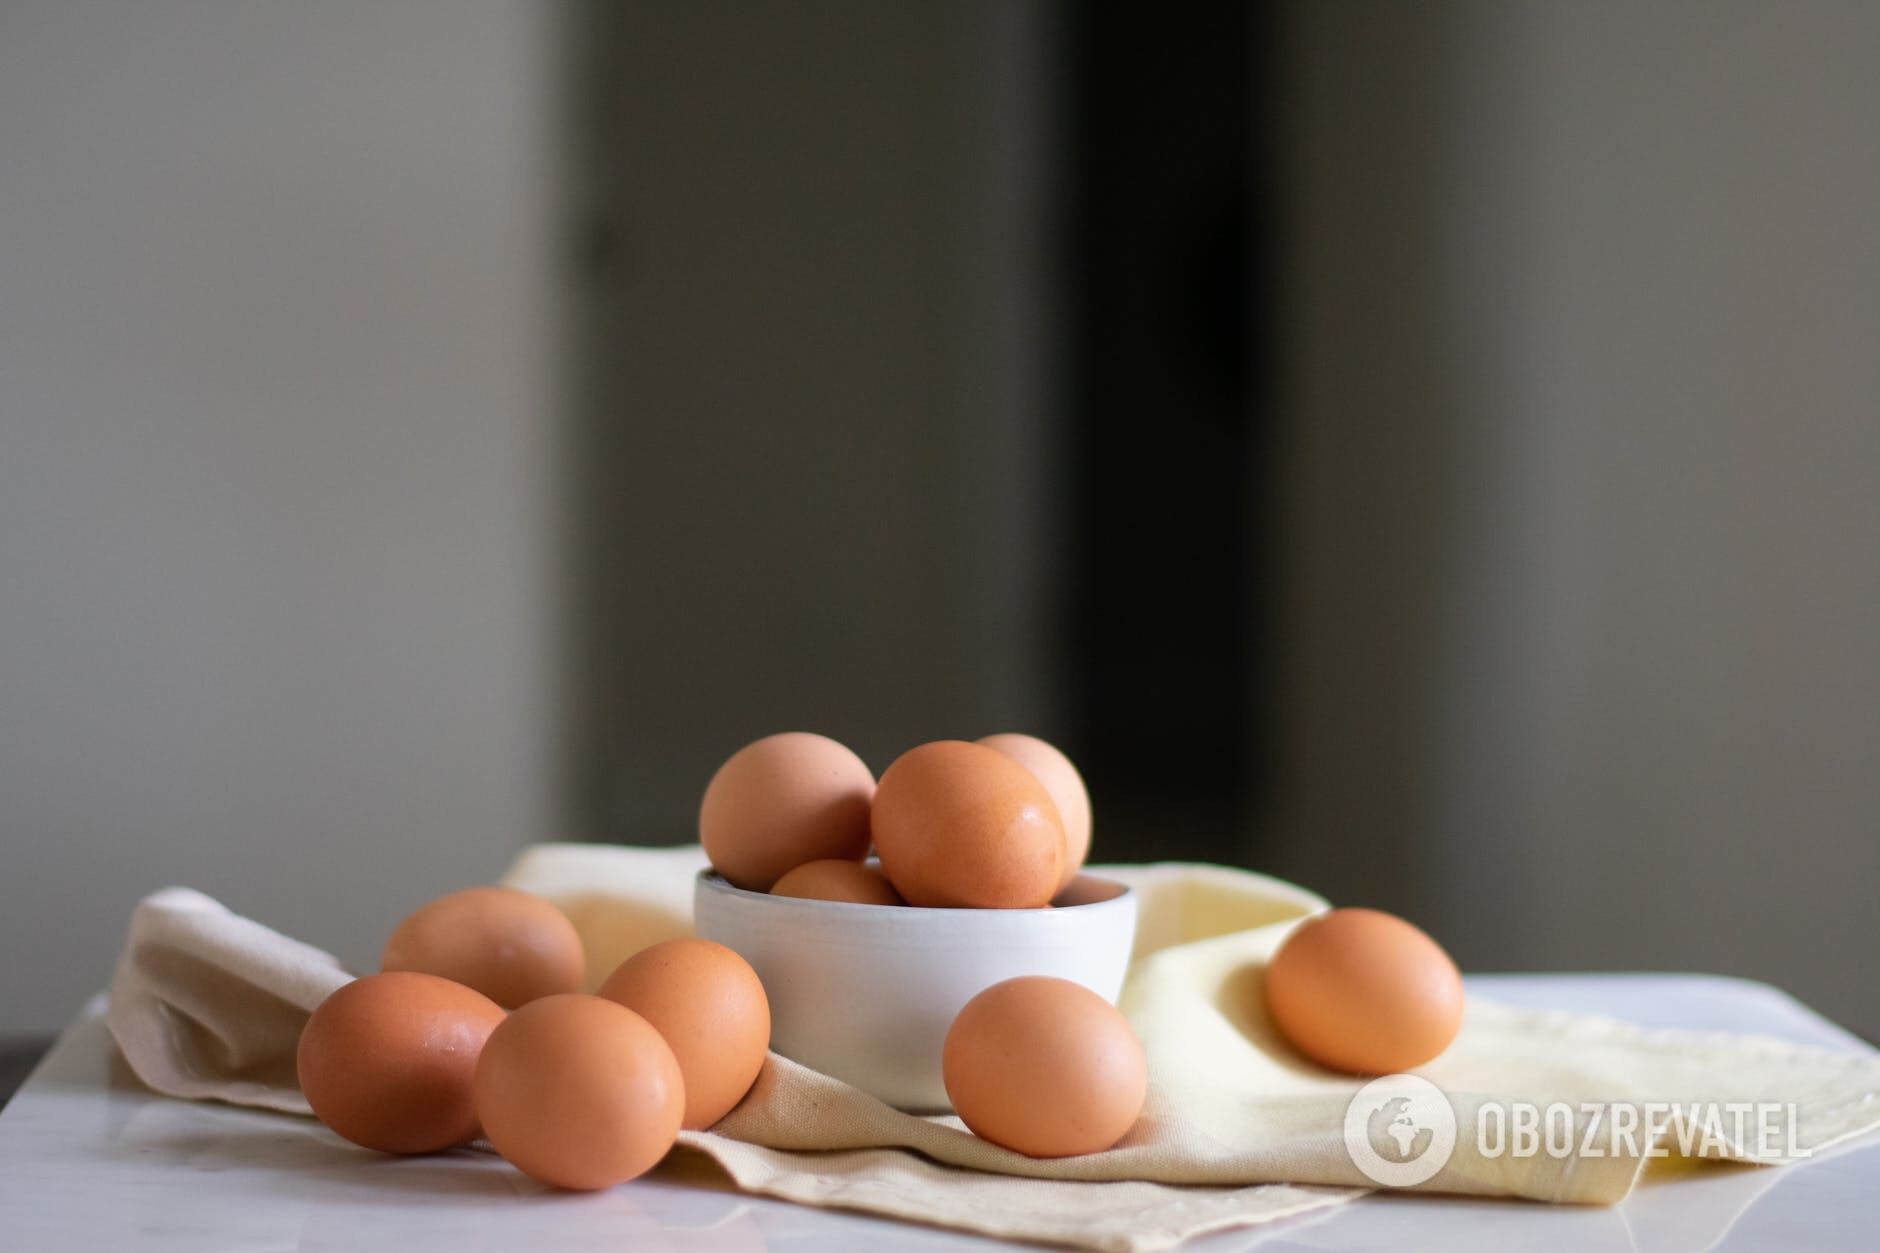 Eggs should be added to your diet regularly